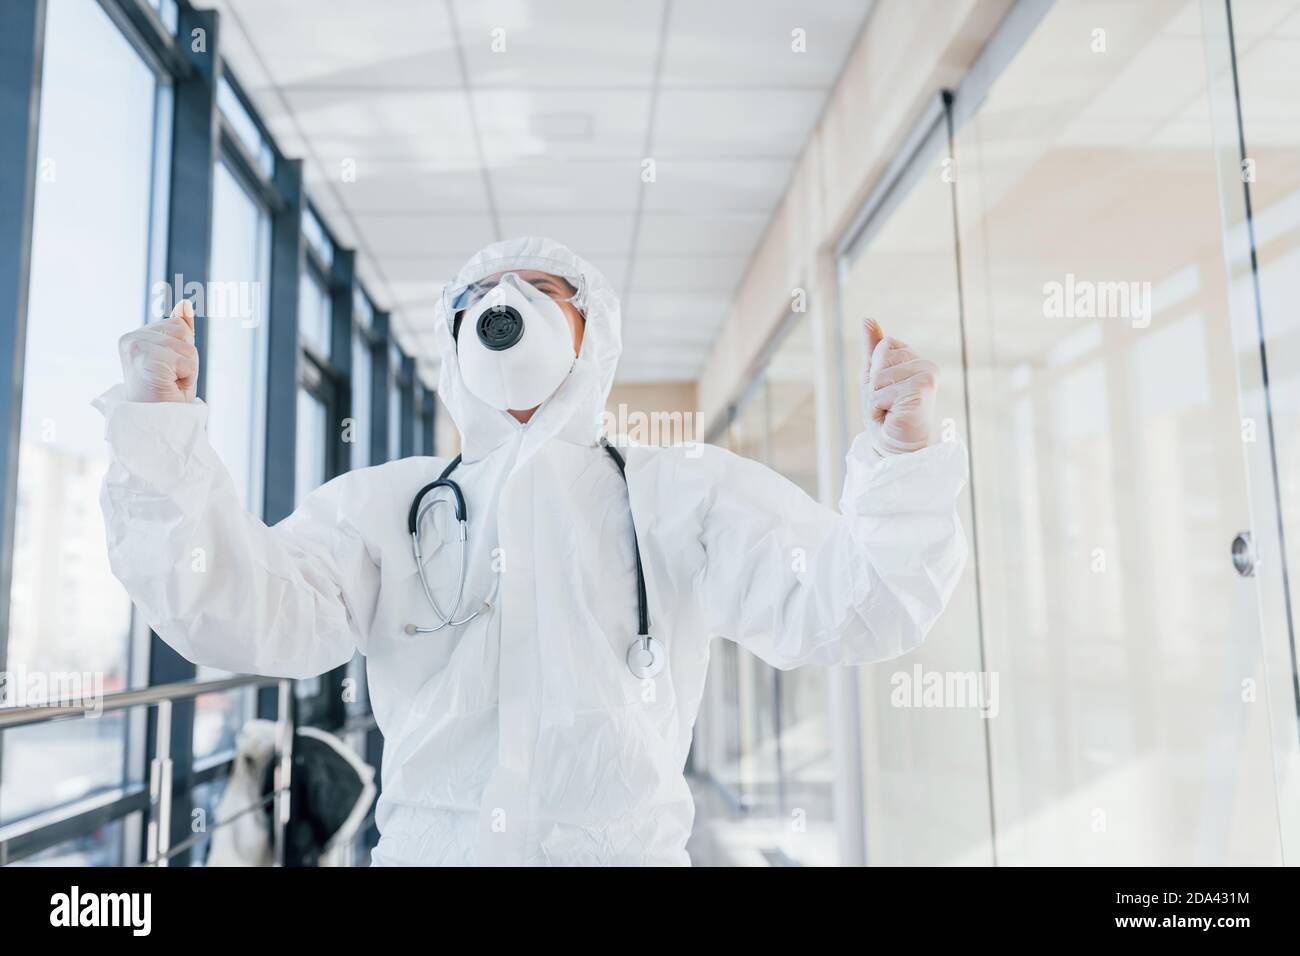 Celebrating victory. Female doctor scientist in lab coat, defensive eyewear and mask standing indoors Stock Photo